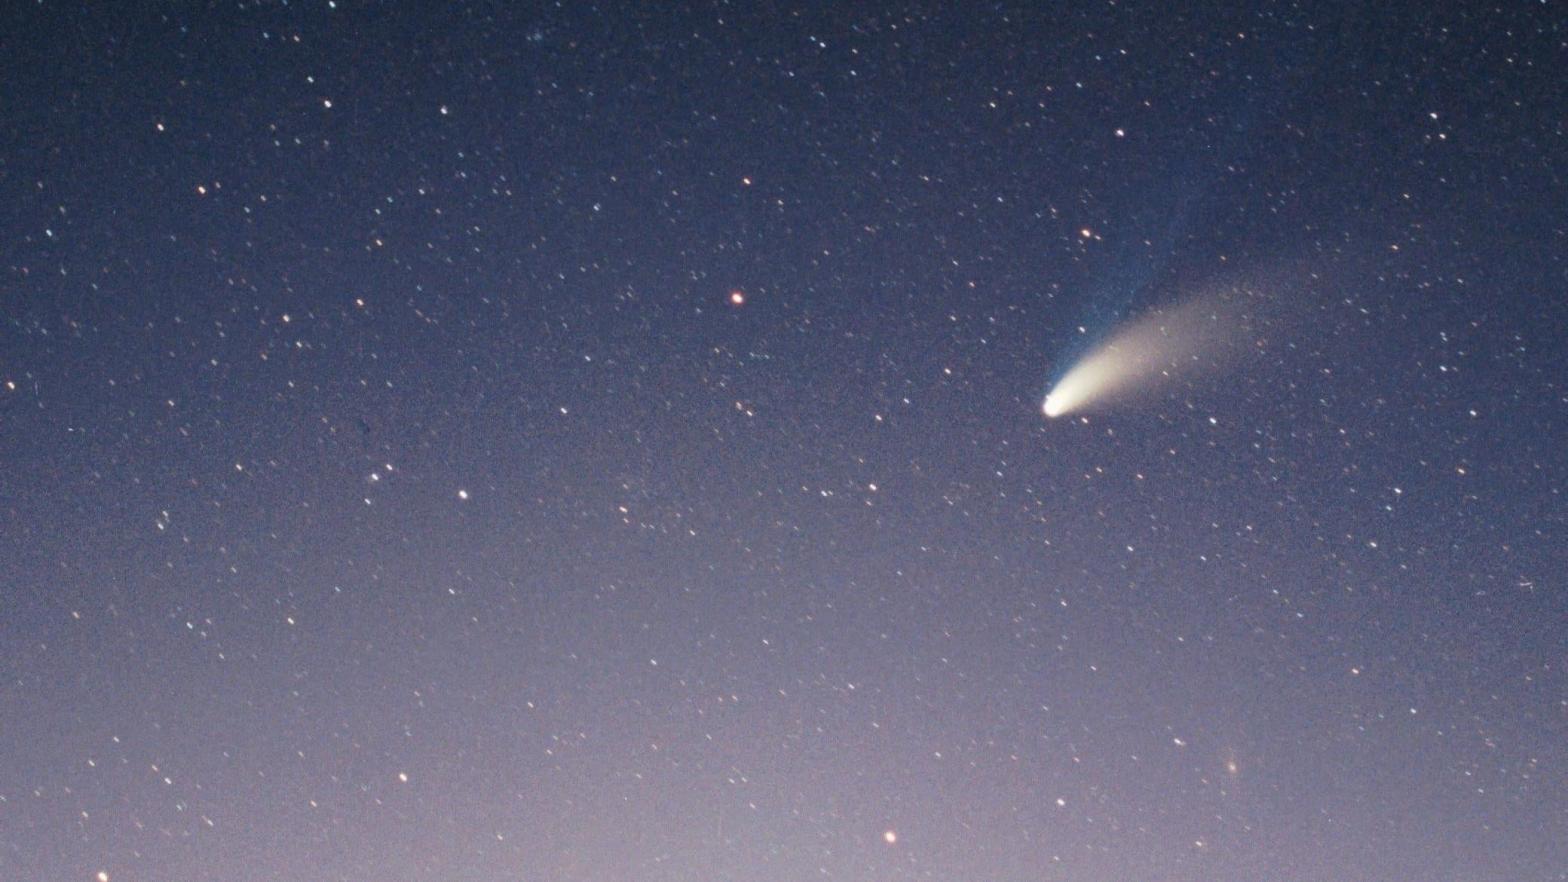 Comet Hale-Bopp as observed from Earth in 1997. The newly detected object could be even larger than Hale-Bopp, but it likely won't be visible to the unaided eye.  (Image: Philipp Salzgeber)